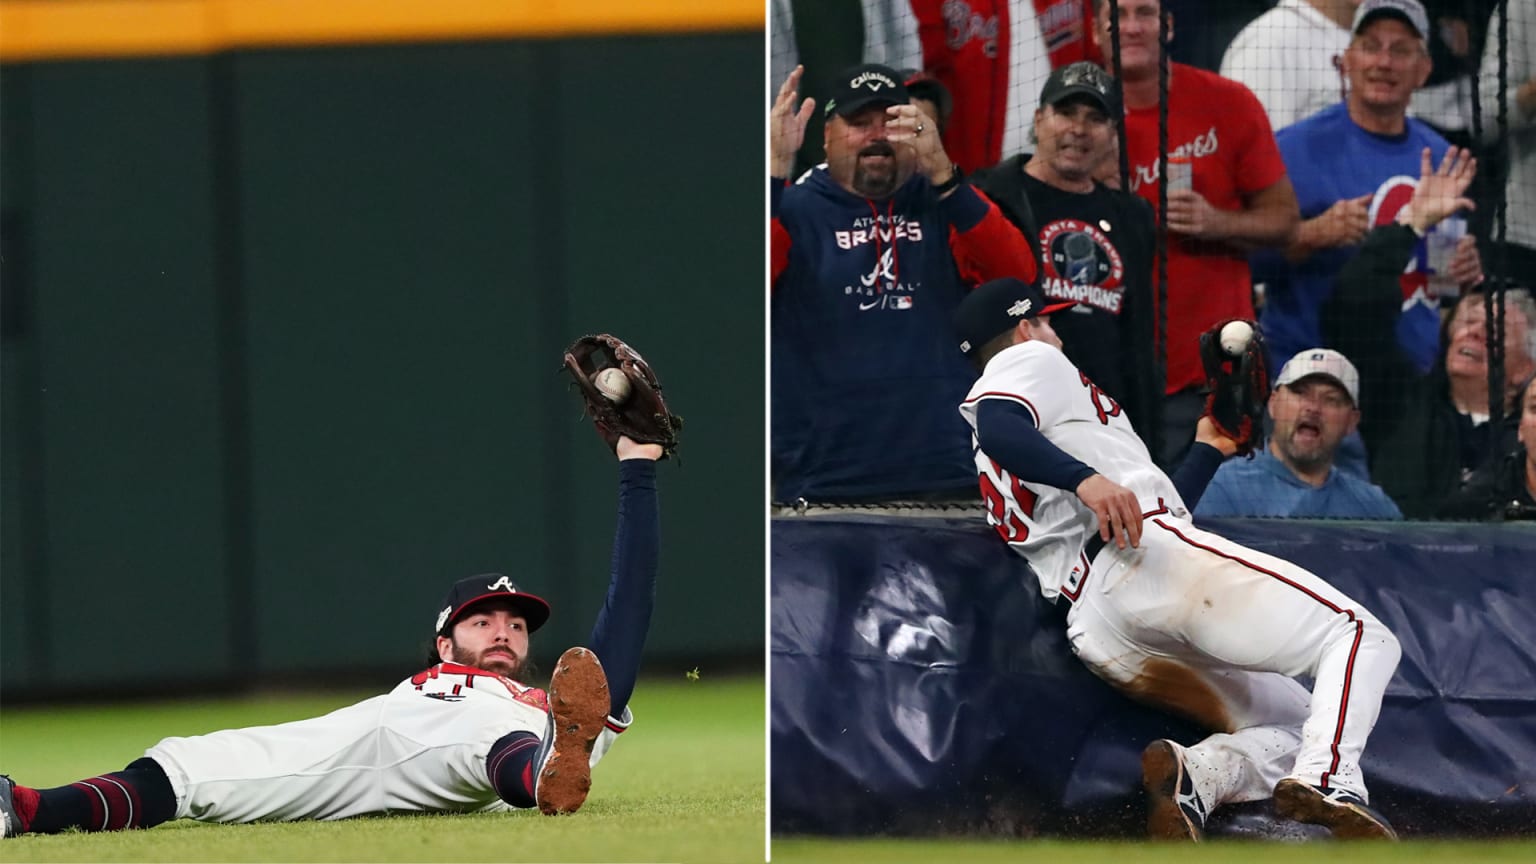 A split image of a player on his back on the grass, holding up his glove with a baseball in it, next to another player sliding near the stands, the baseball just settling into his glove